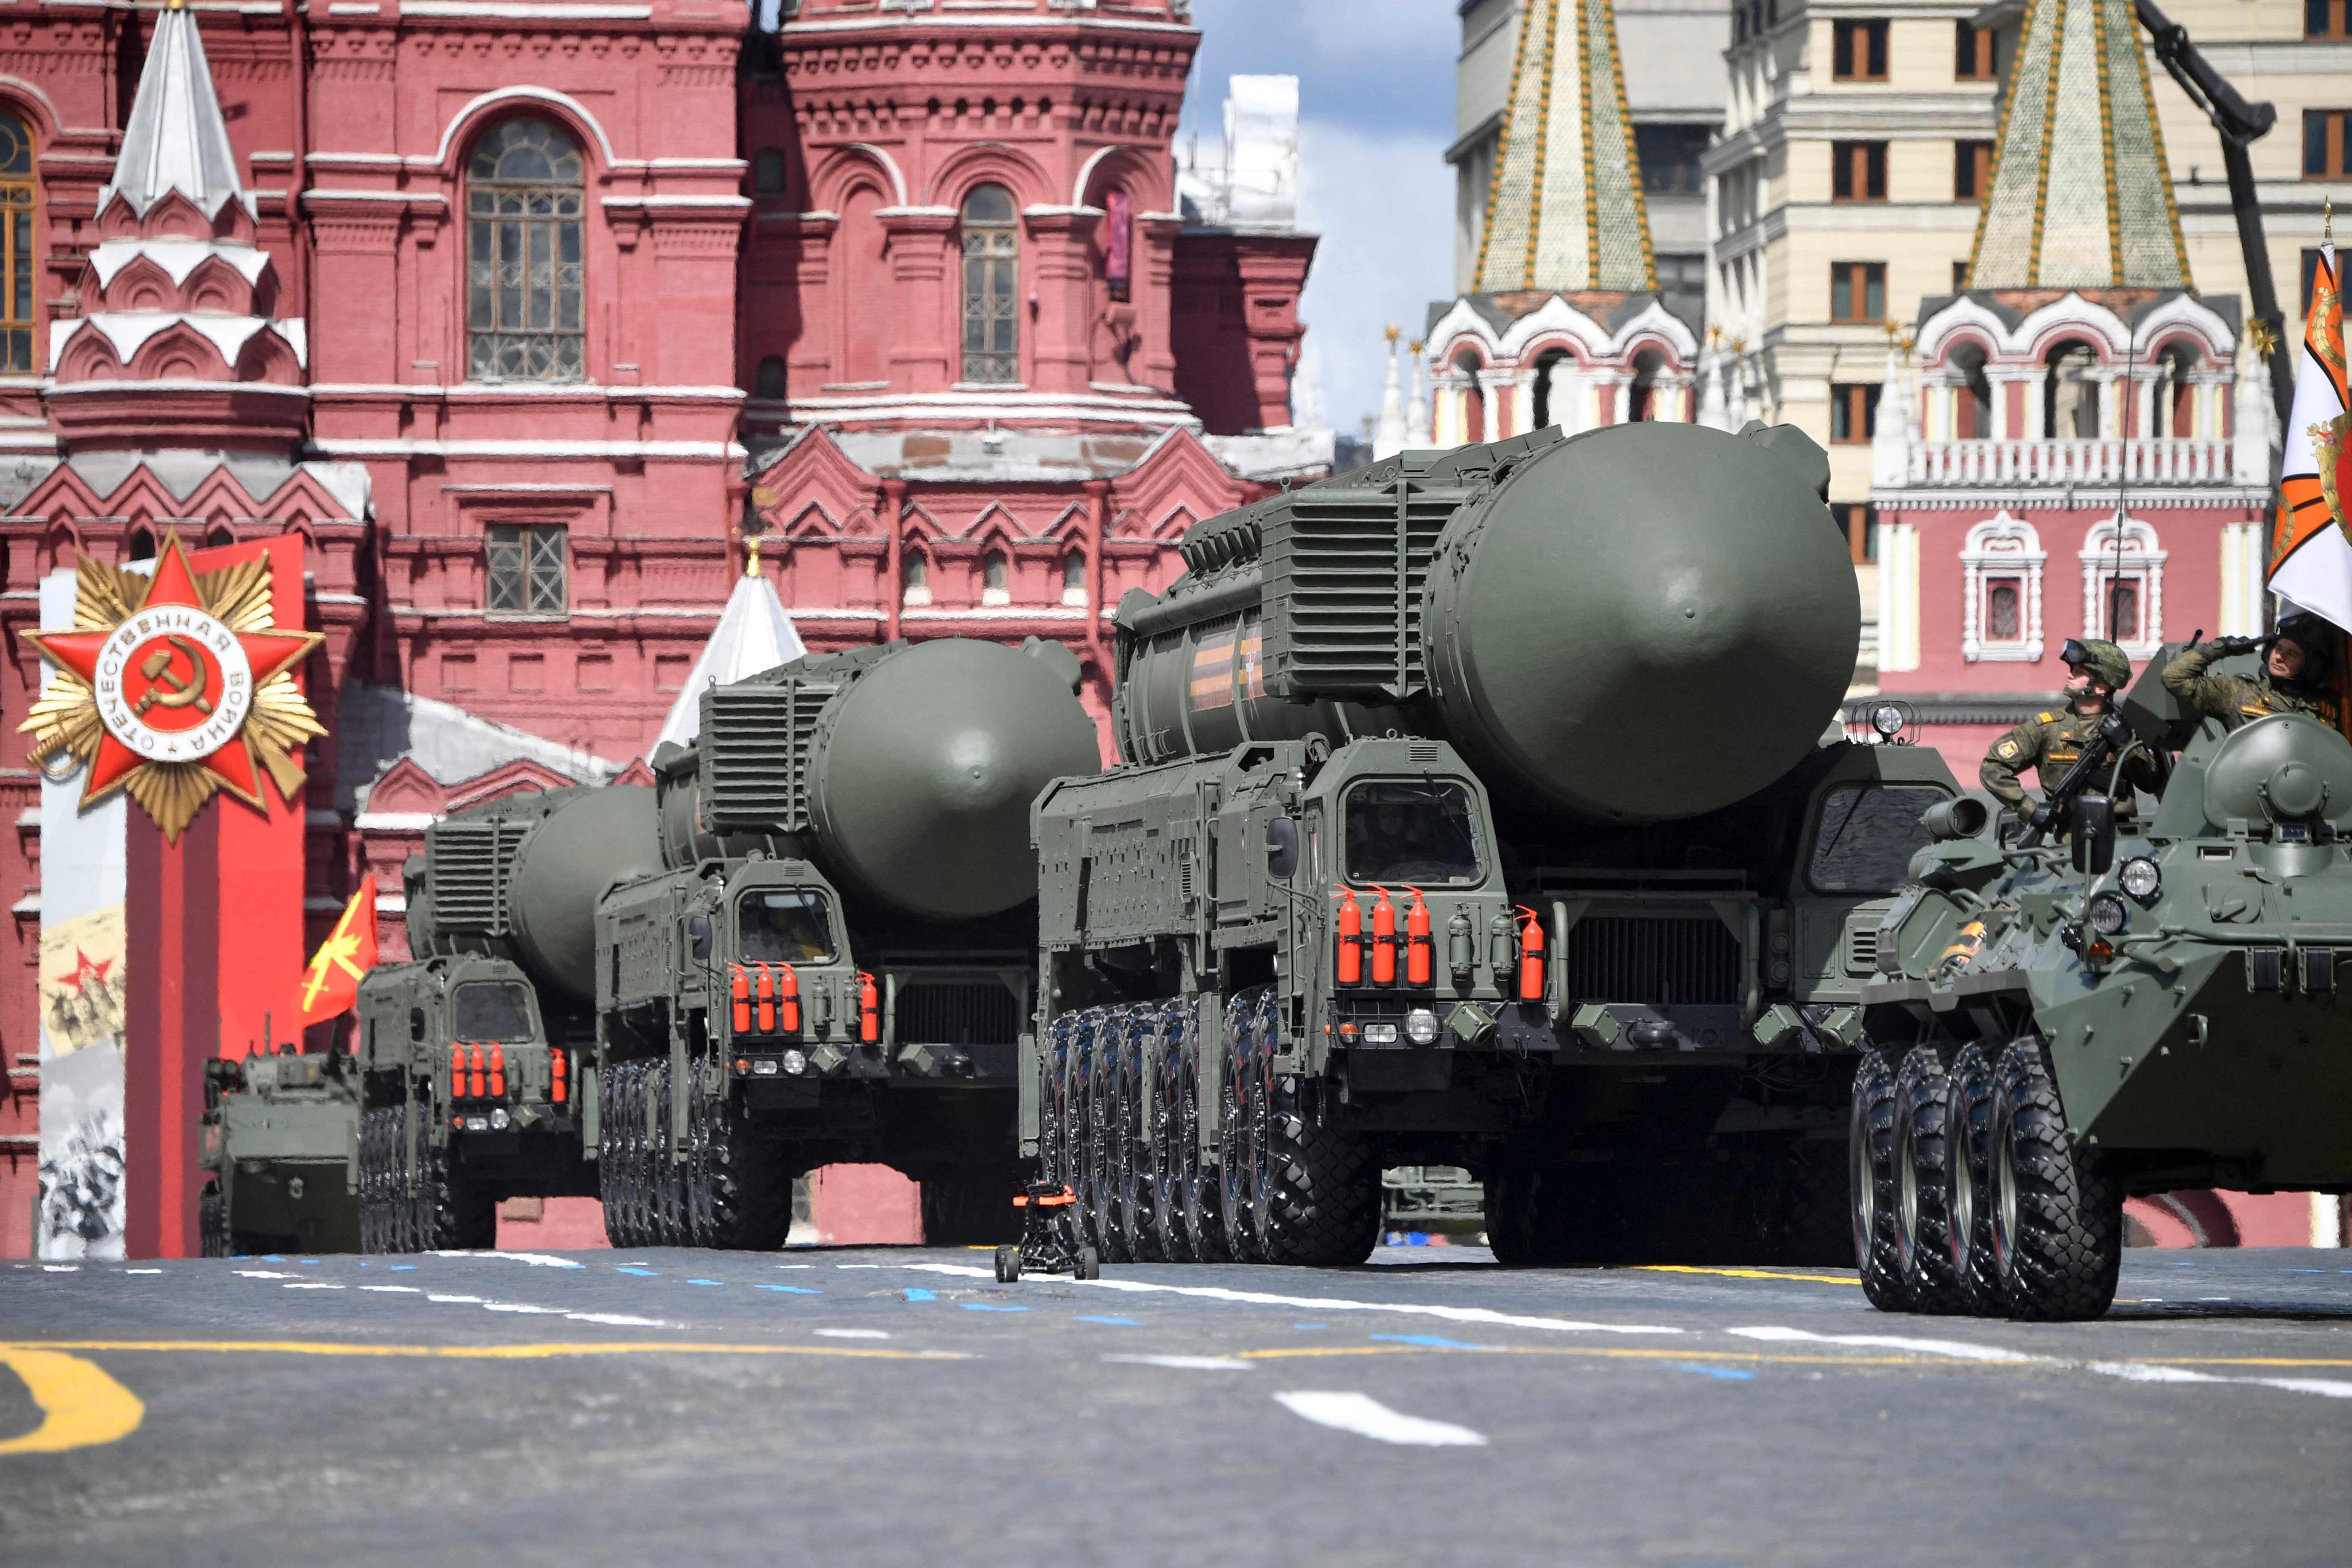 Russian Yars intercontinental ballistic missile launchers parade through Red Square during the Victory Day military parade in central Moscow on May 9, 2022. Photo: AFP